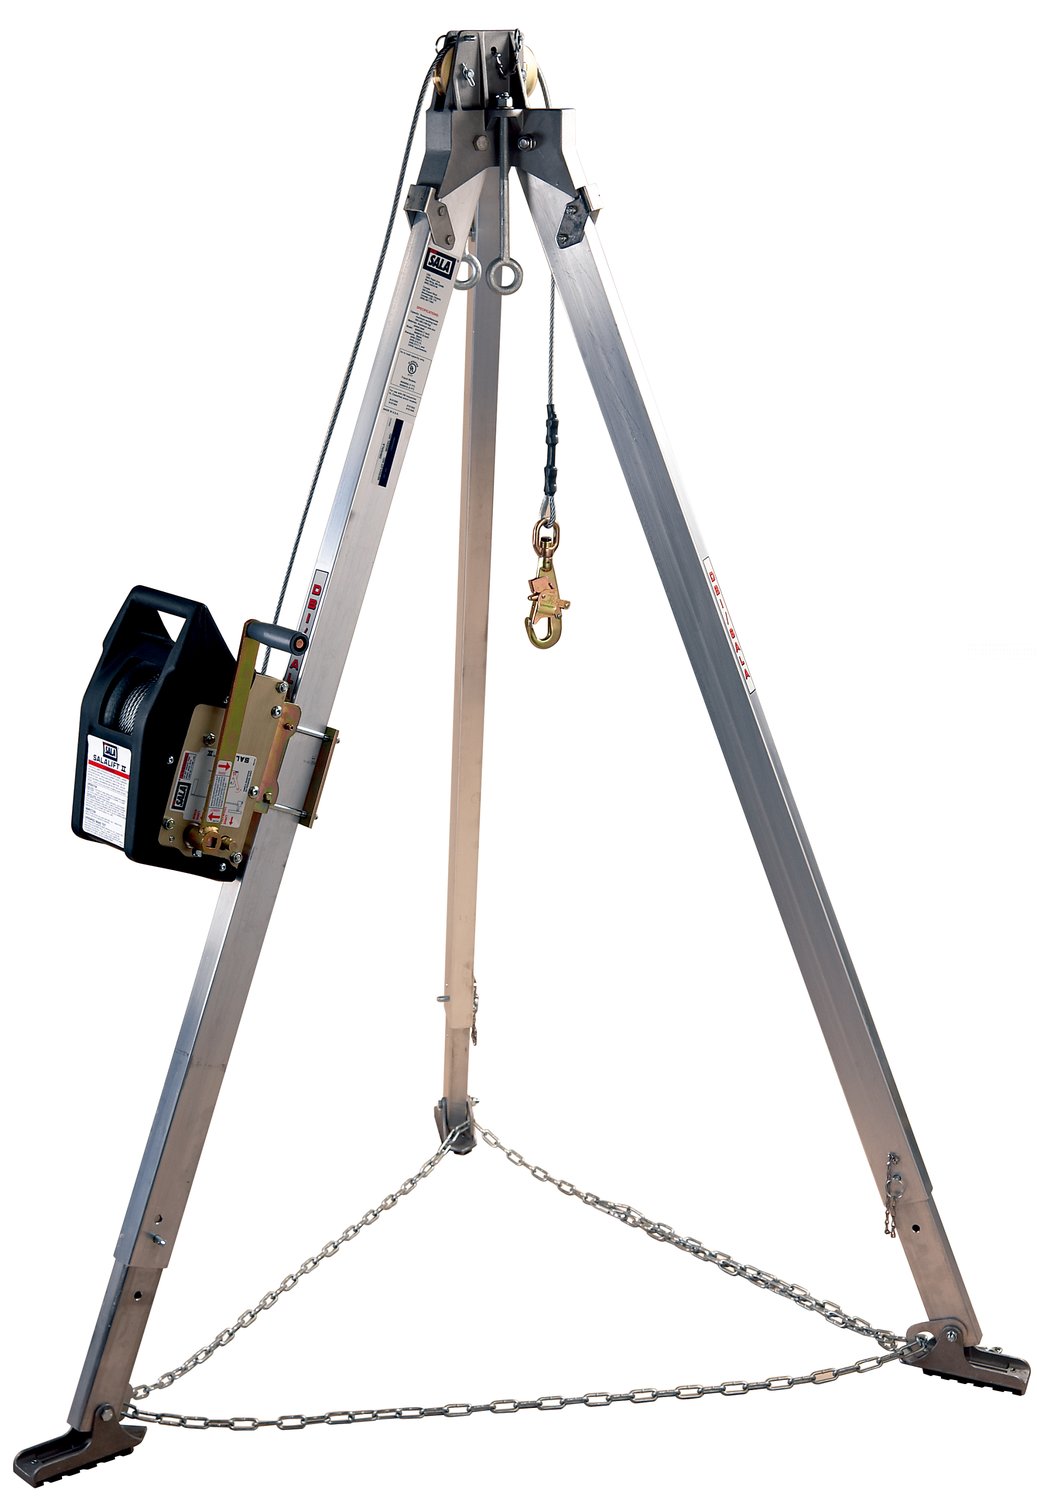 7012820466 - 3M DBI-SALA Confined Space Aluminum Tripod with Winch 8300045, 9 ft High, 120 ft Stainless Steel Cable